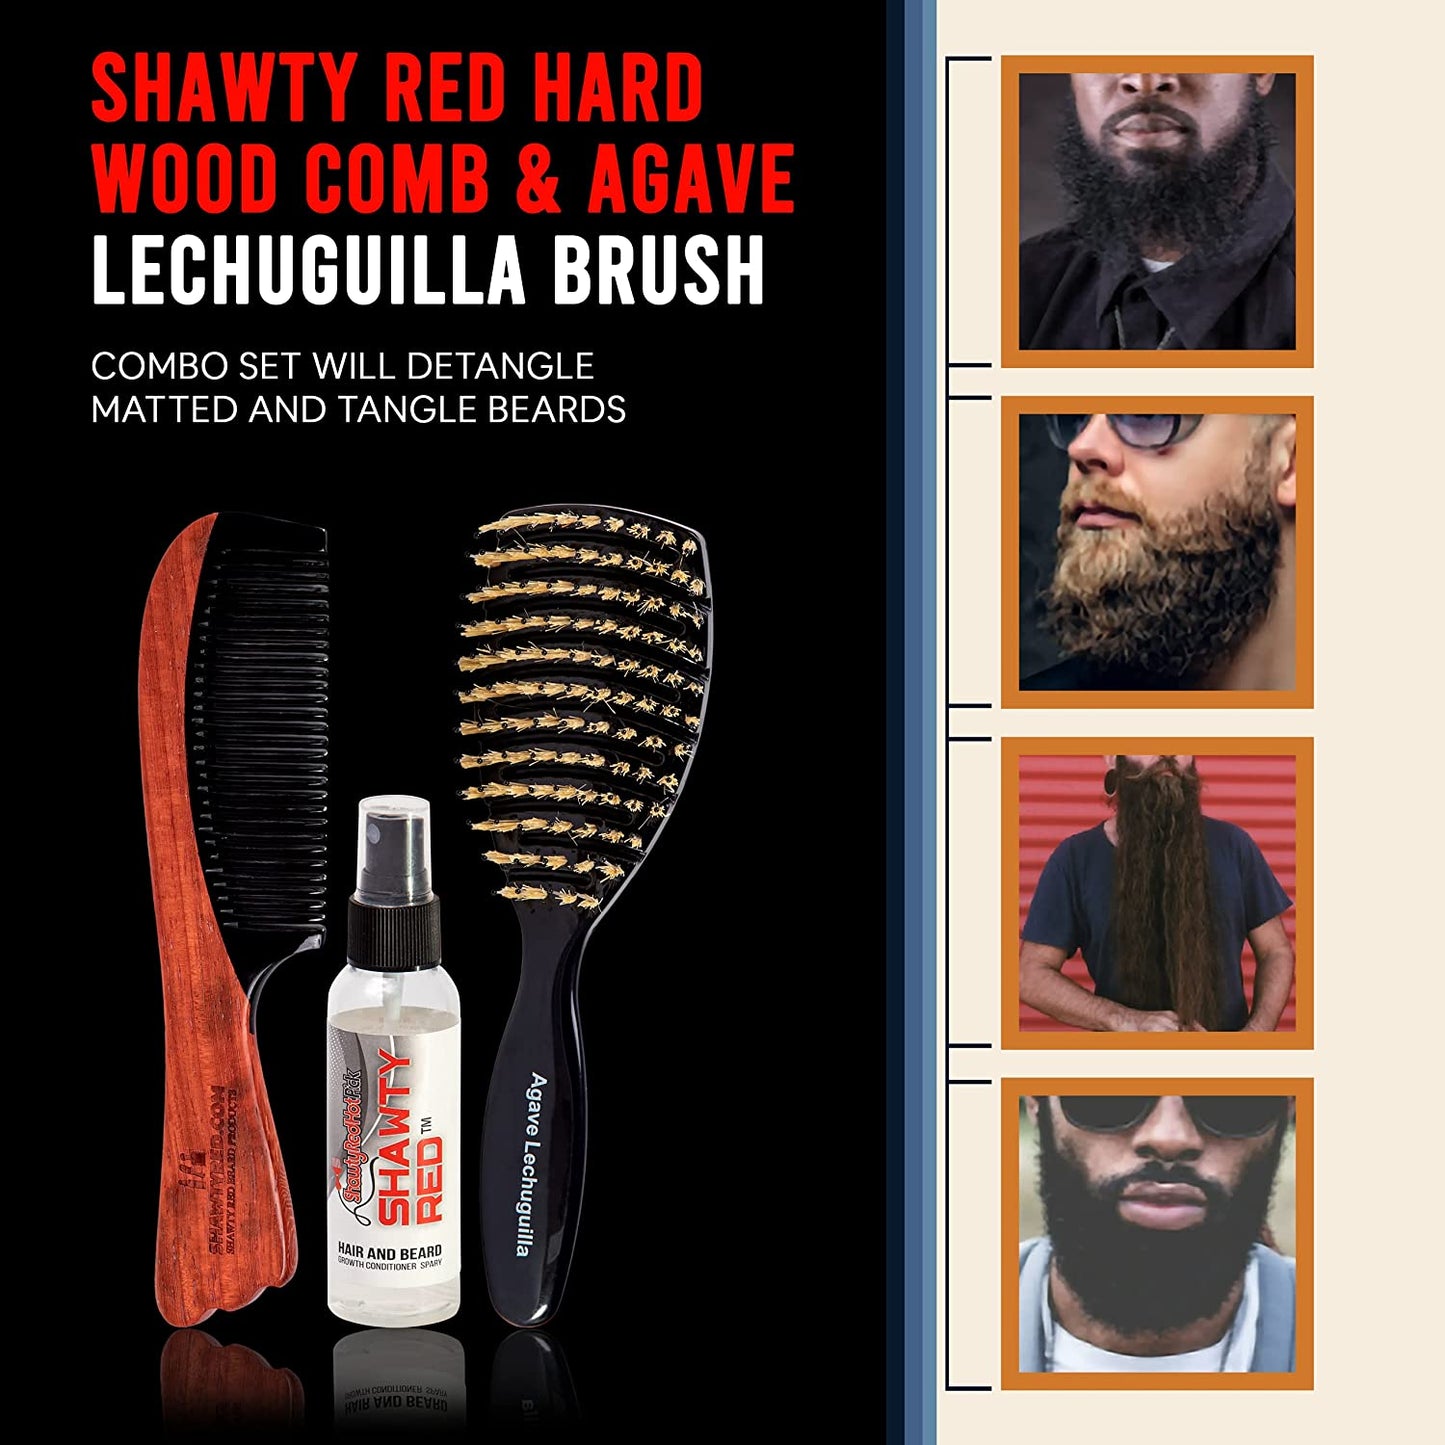 The KoSher Agave Lechuguilla Hairbrush W/ Wood Comb & Hair Conditioning Spray